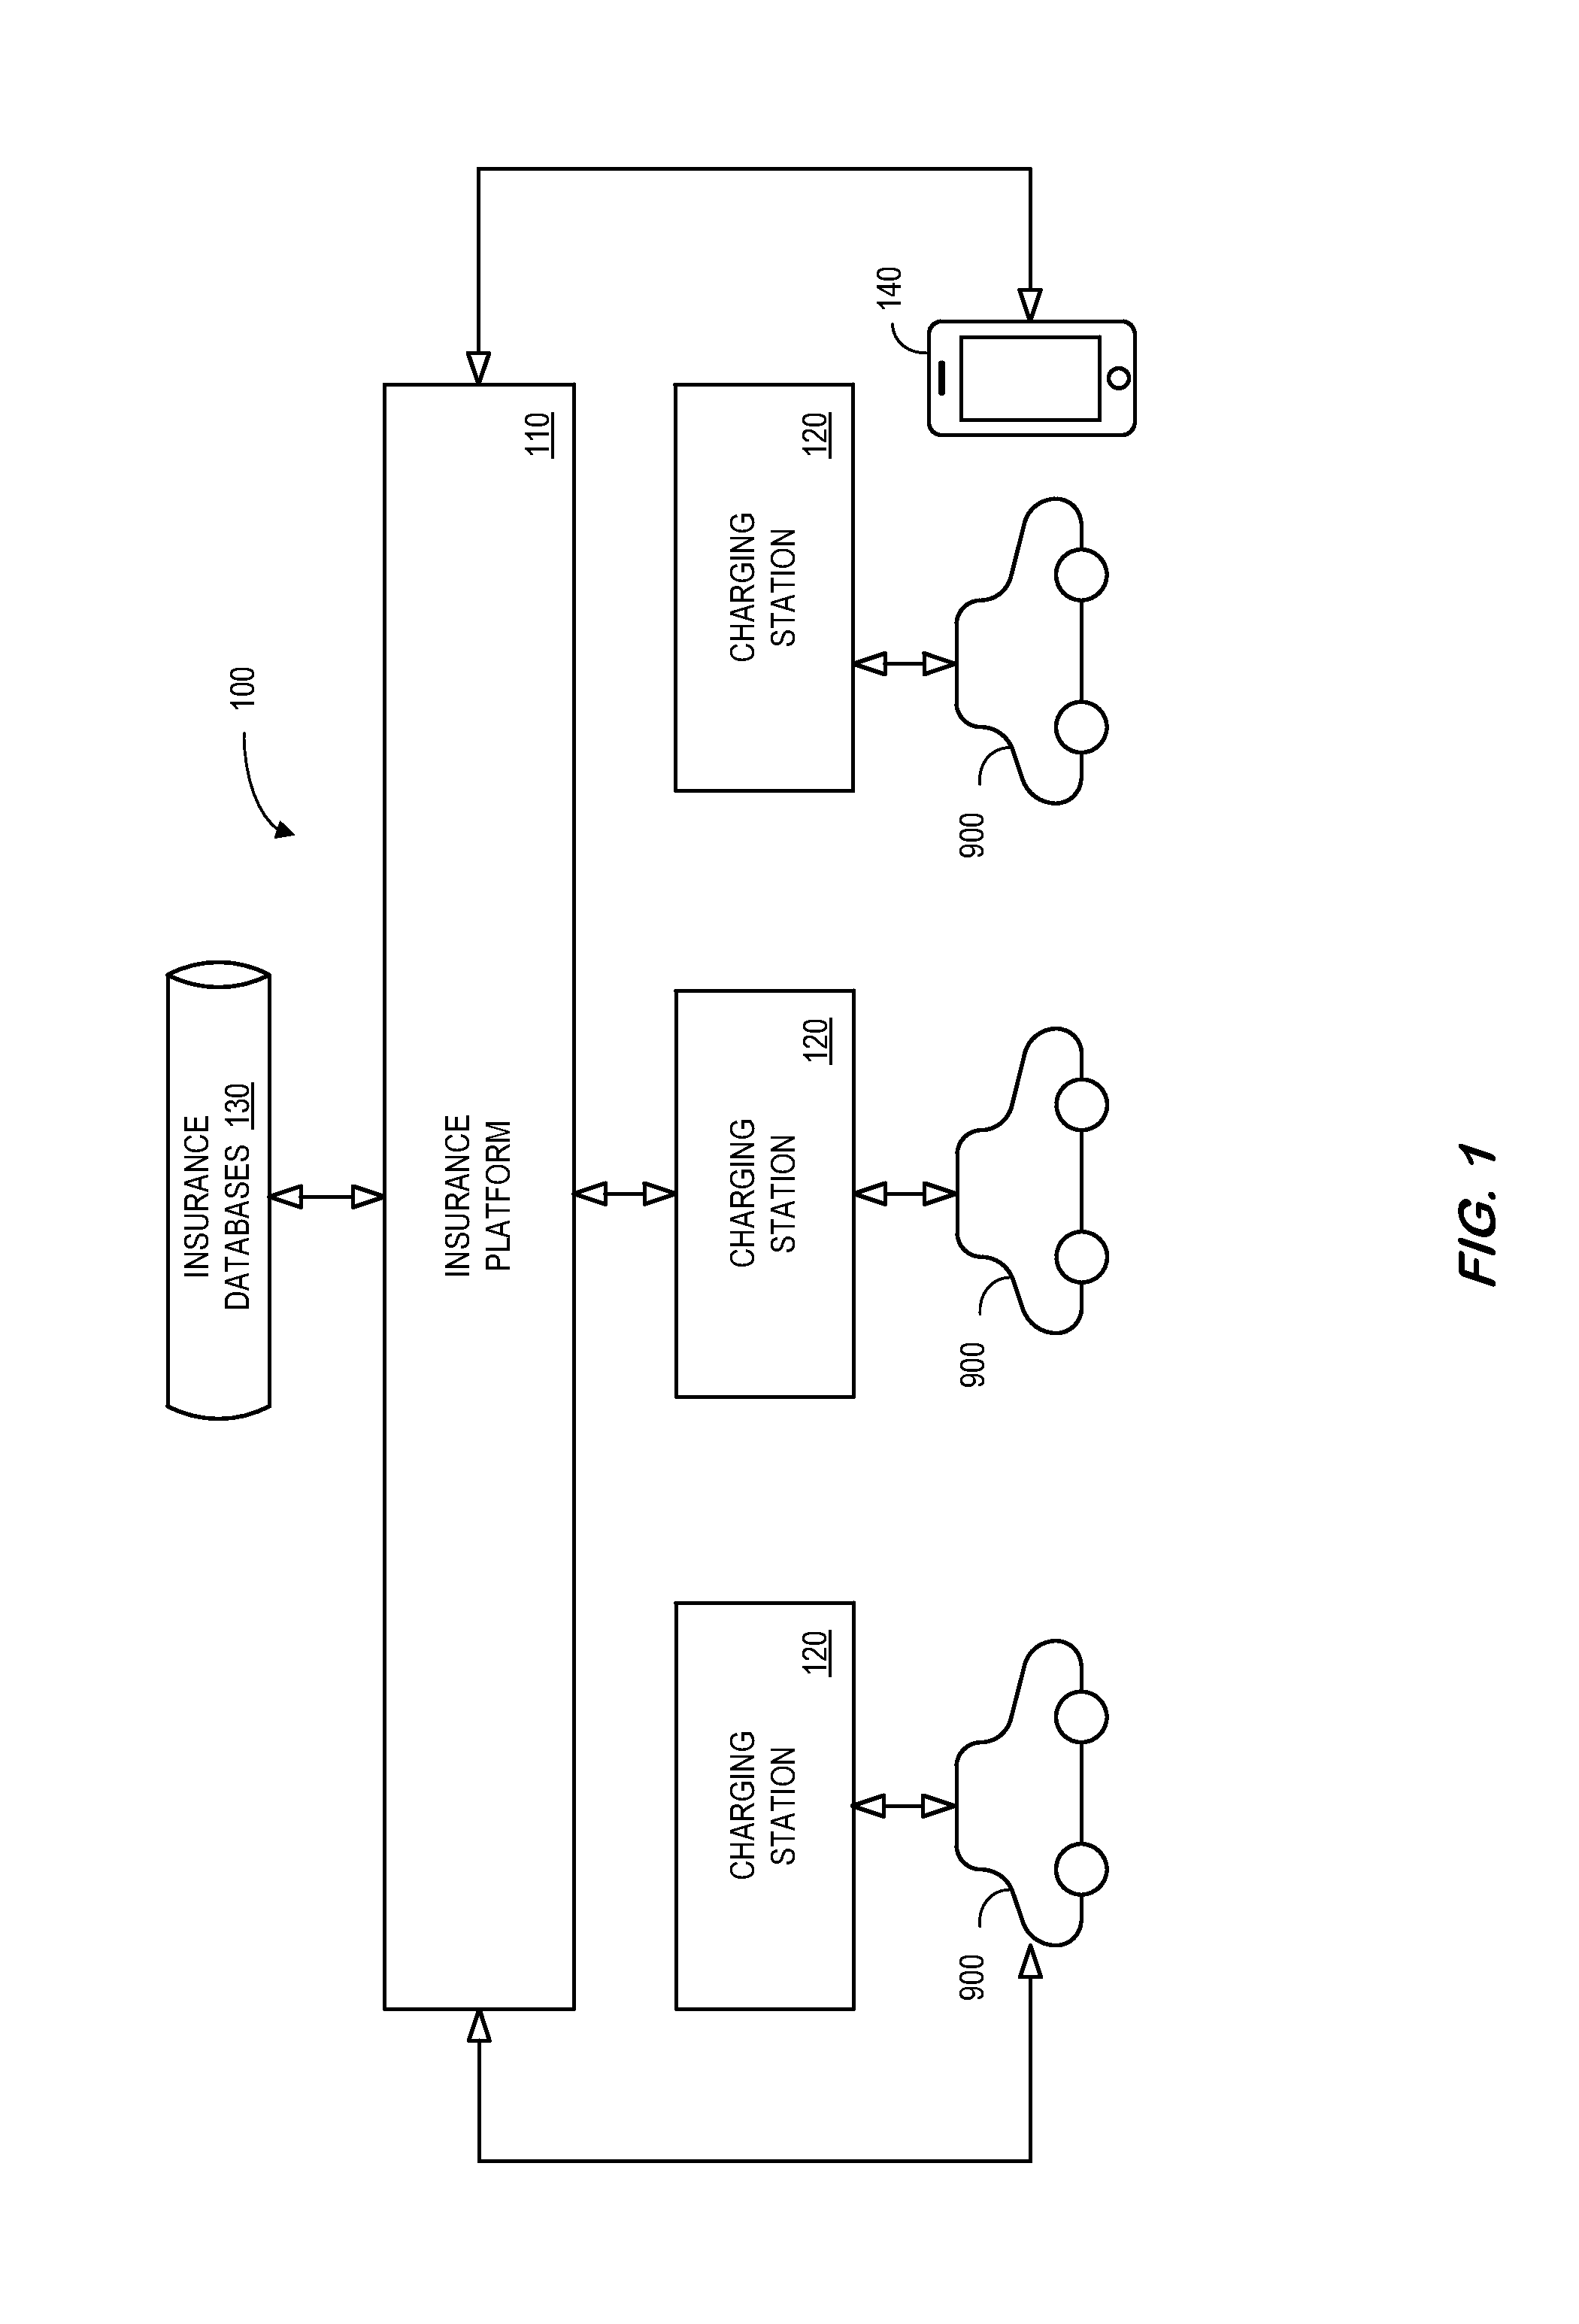 Systems and methods associated with insurance for electric vehicles